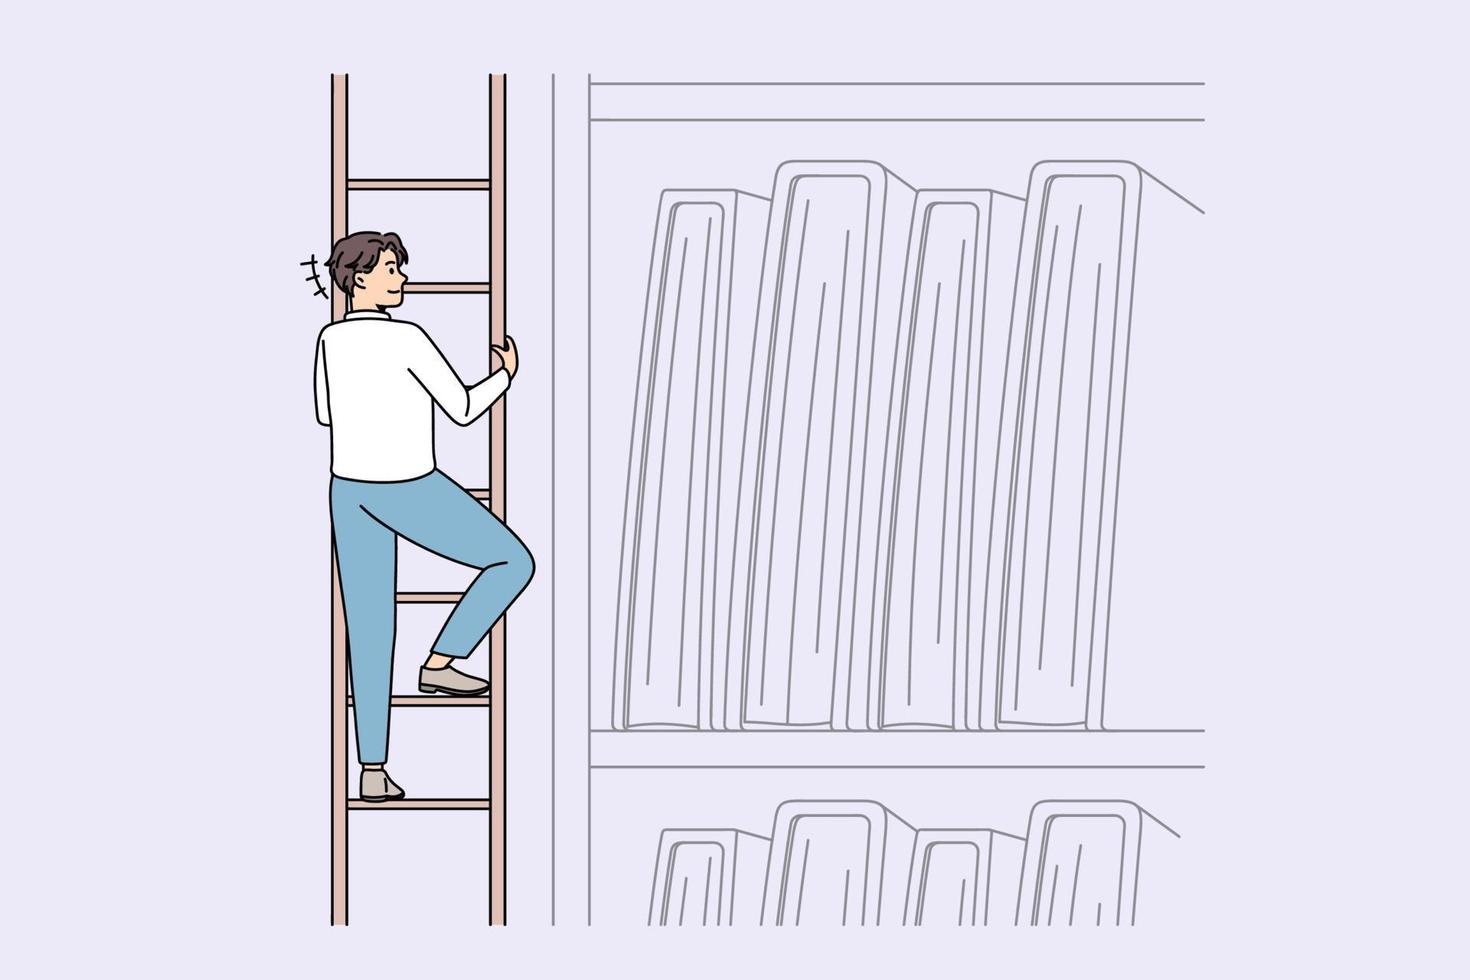 Searching for information and knowledge concept. Smiling man climbing on ladder trying to reach on top shelf ta take documents or books vector illustration